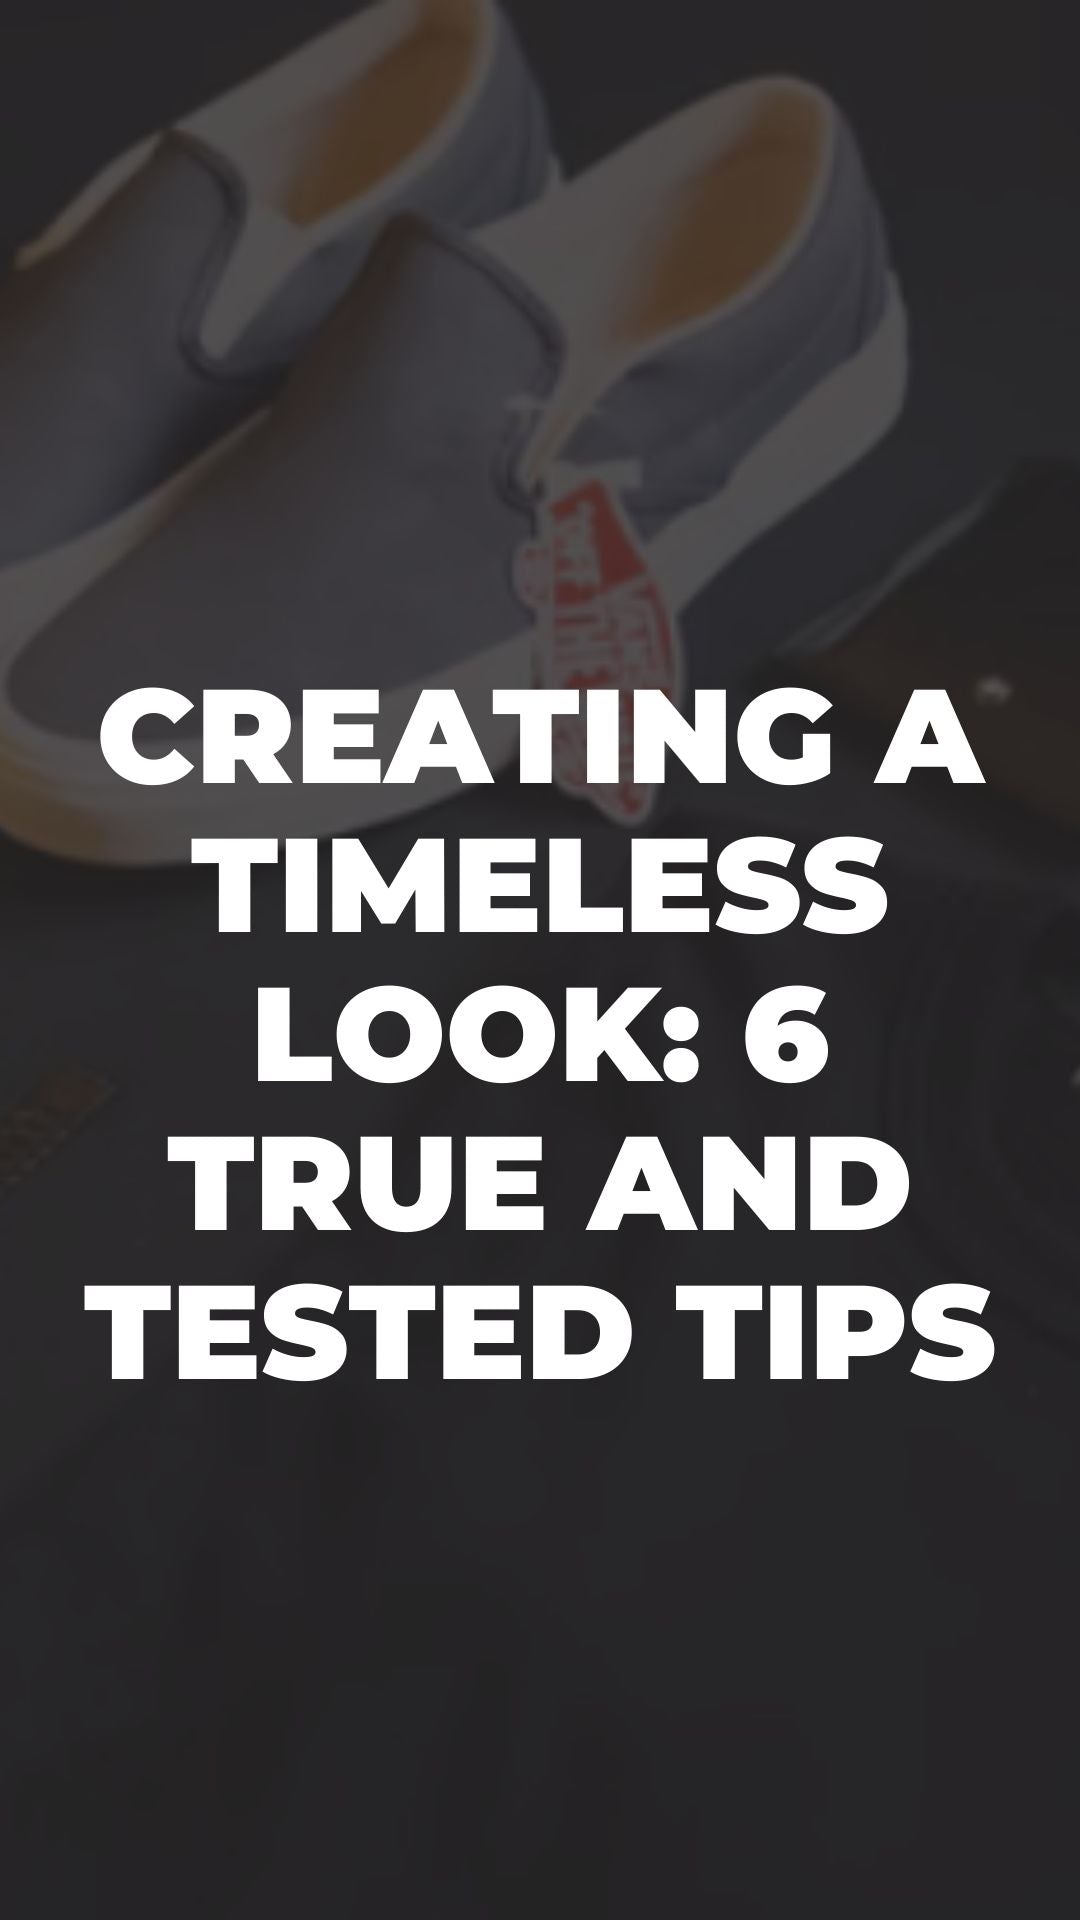 Creating A Timeless Look: 6 True And Tested Tips